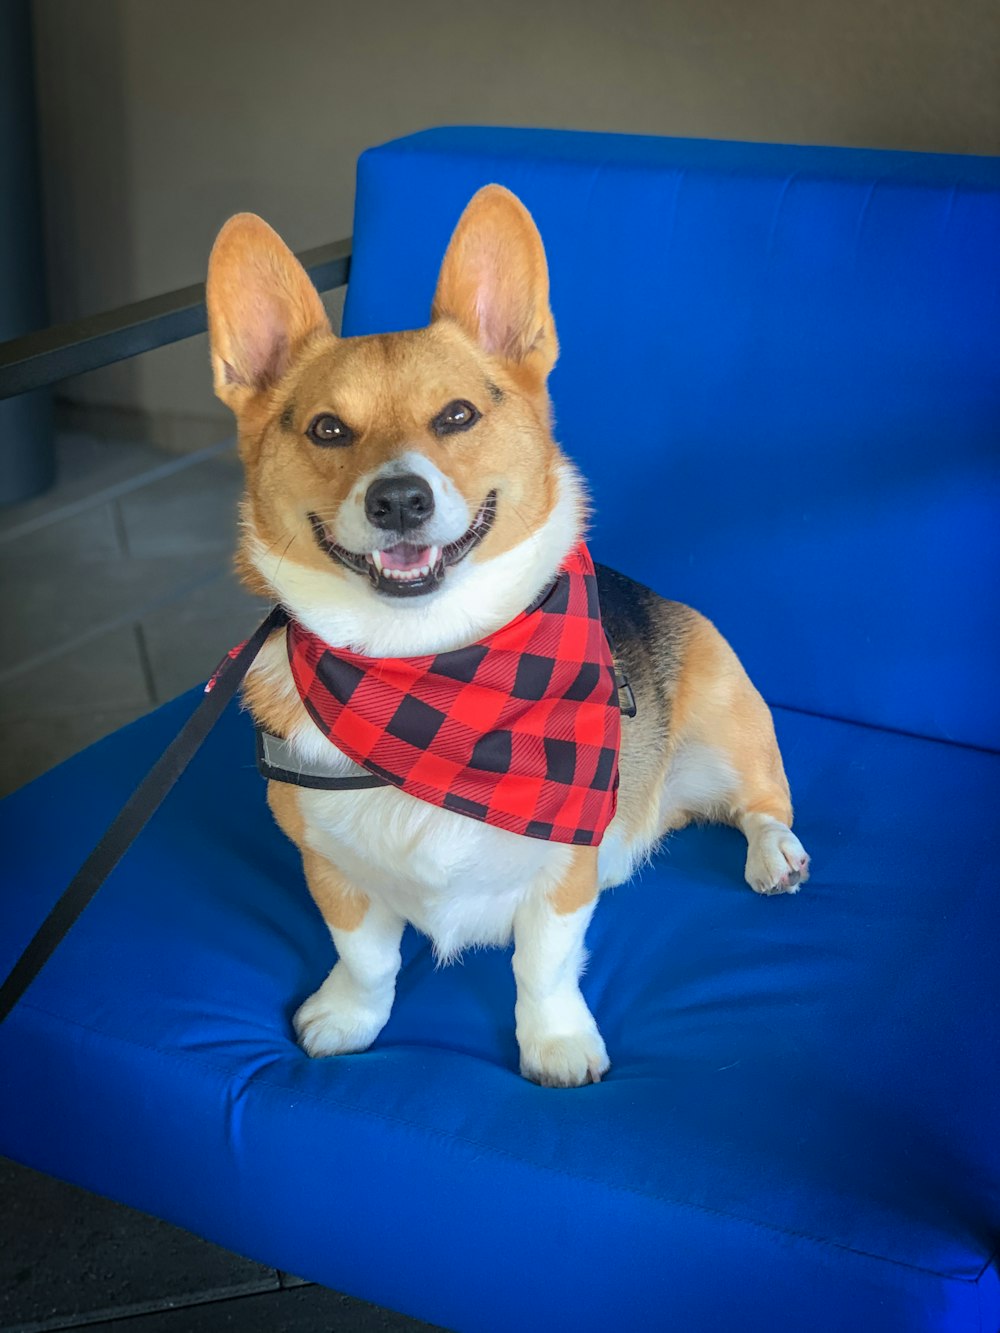 a dog sitting on a blue chair wearing a red and black scarf